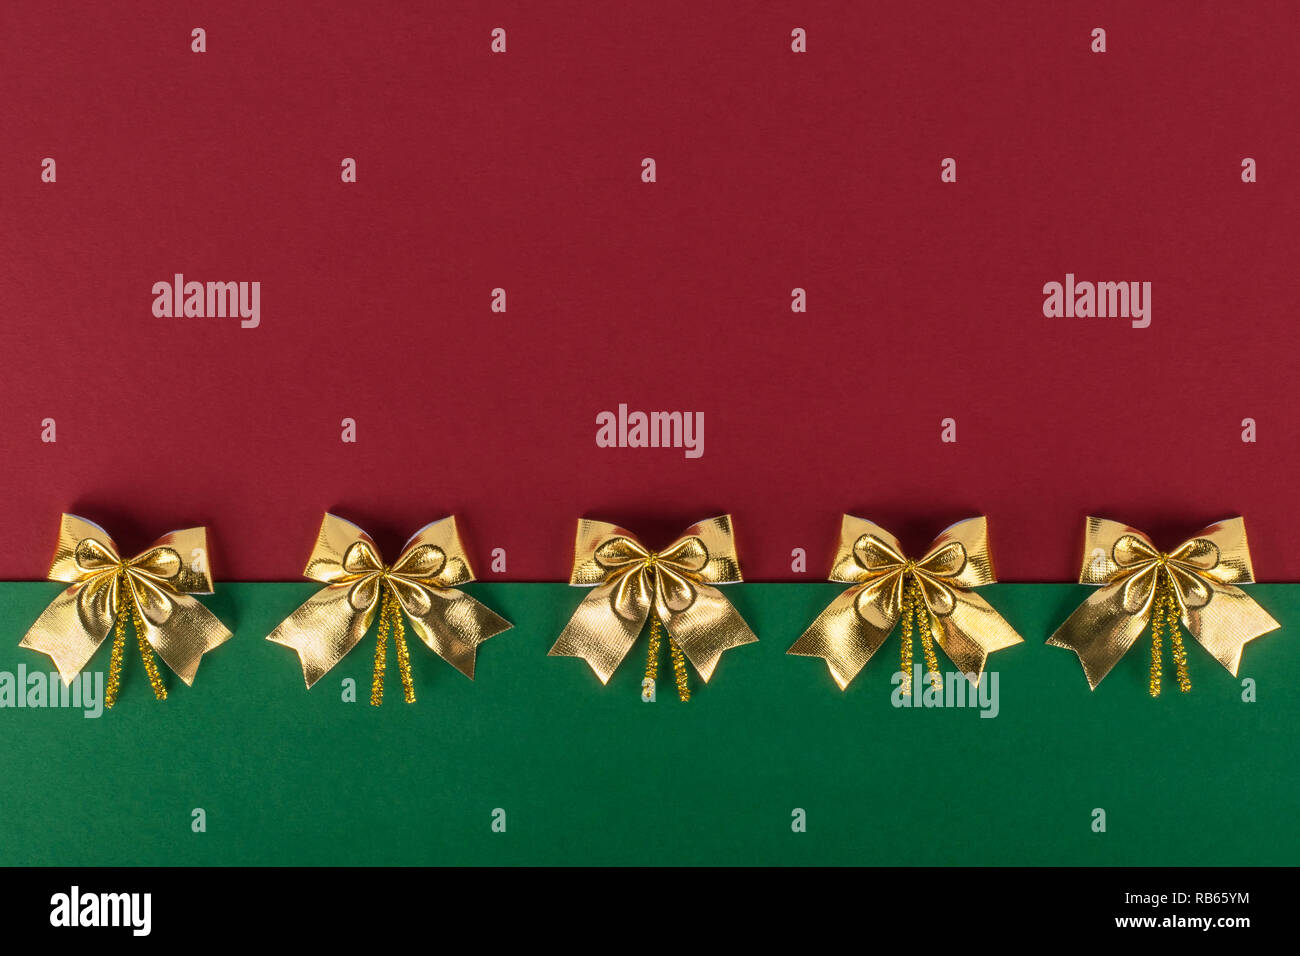 Christmas red-green background with gold bows arranged in a row Stock Photo